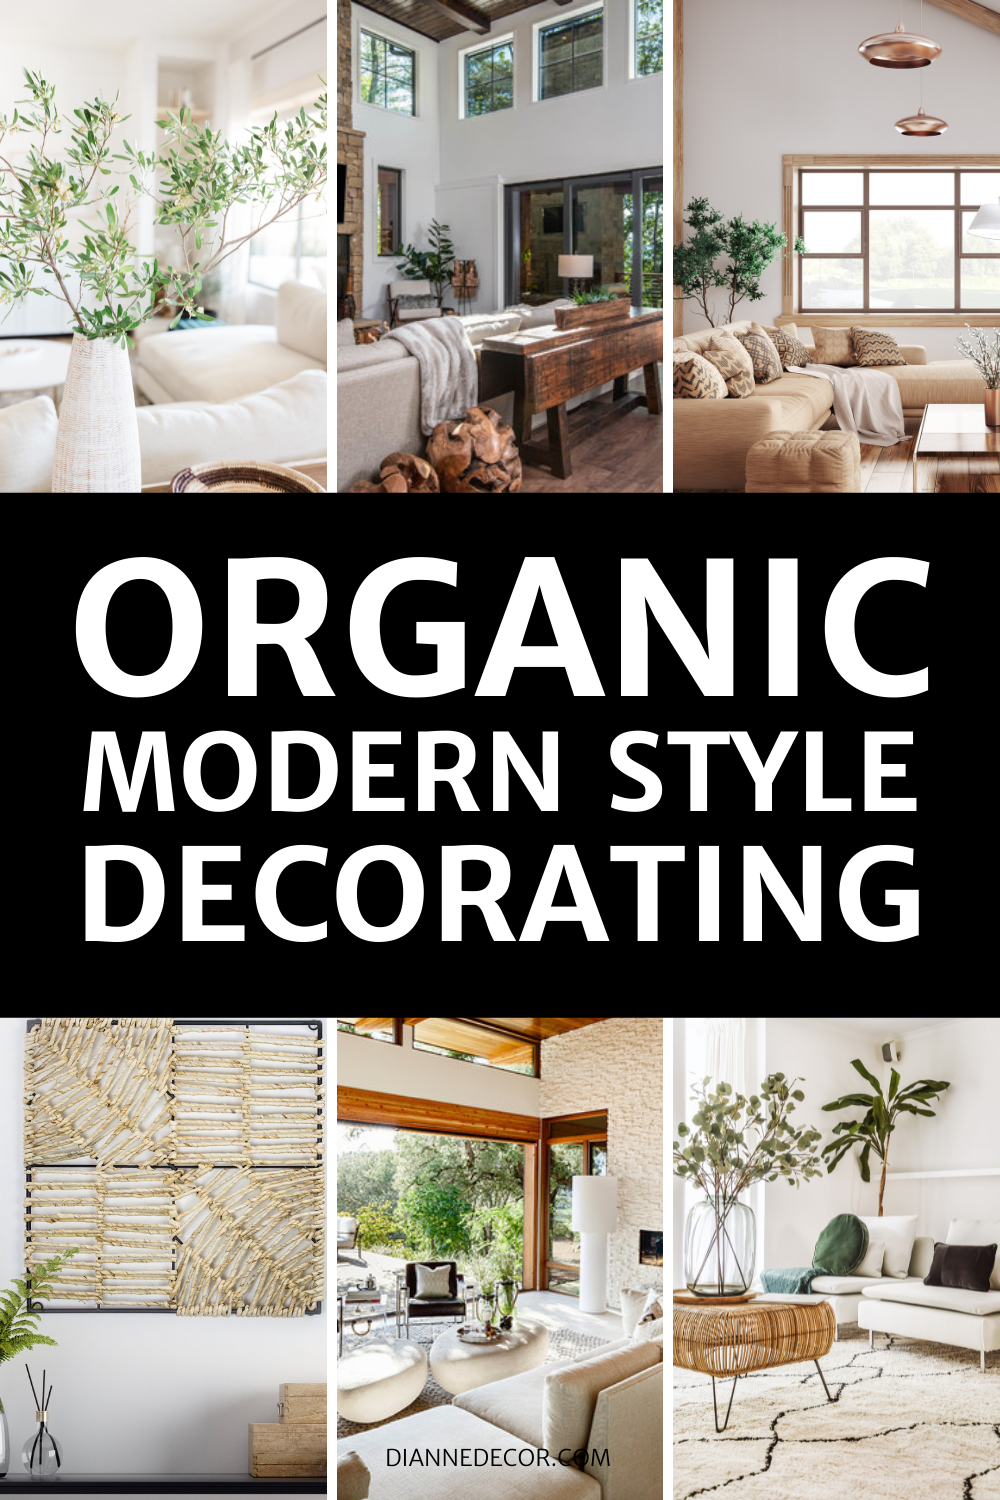 What Is Organic Modern Style?